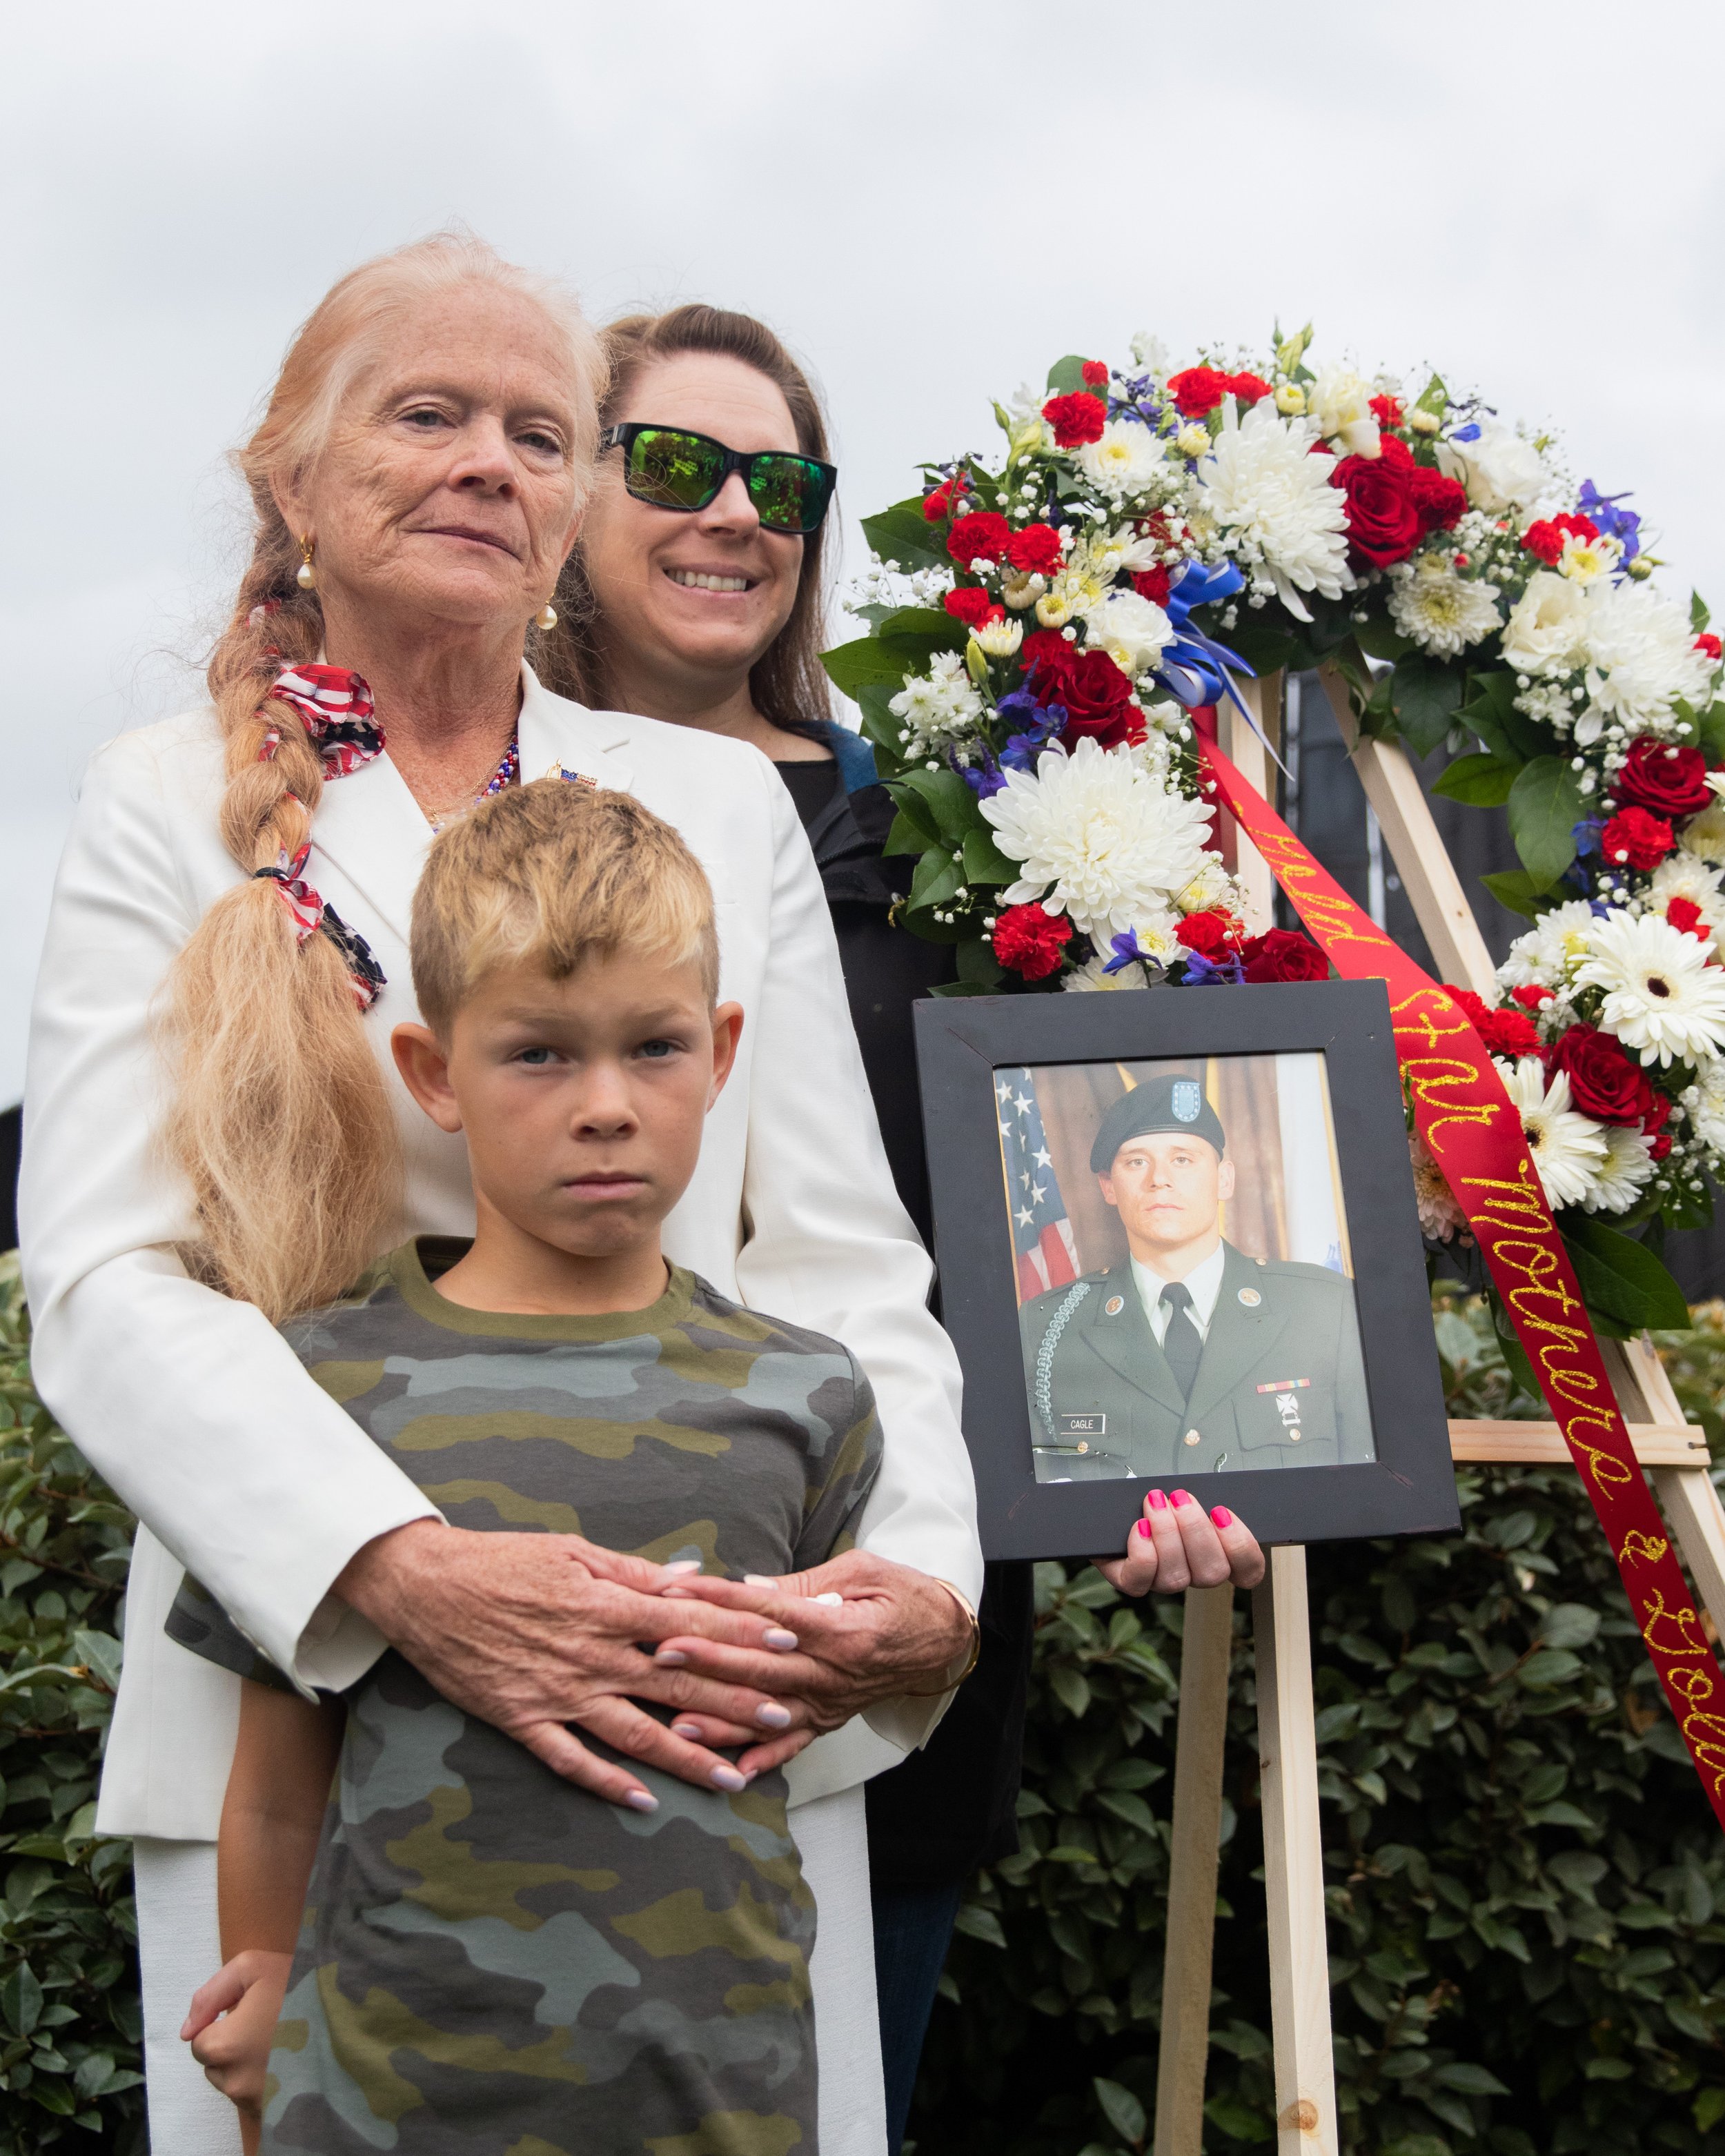  Gail Johnson (in white) with her daughter, grandson, and a picture of her son Daniel Cagle standing in front of the Gold Star Mothers and Wives Wreath during the Memorial Day Celebration at Los Angeles National Cemetery in Los Angeles, Calif., on Mo